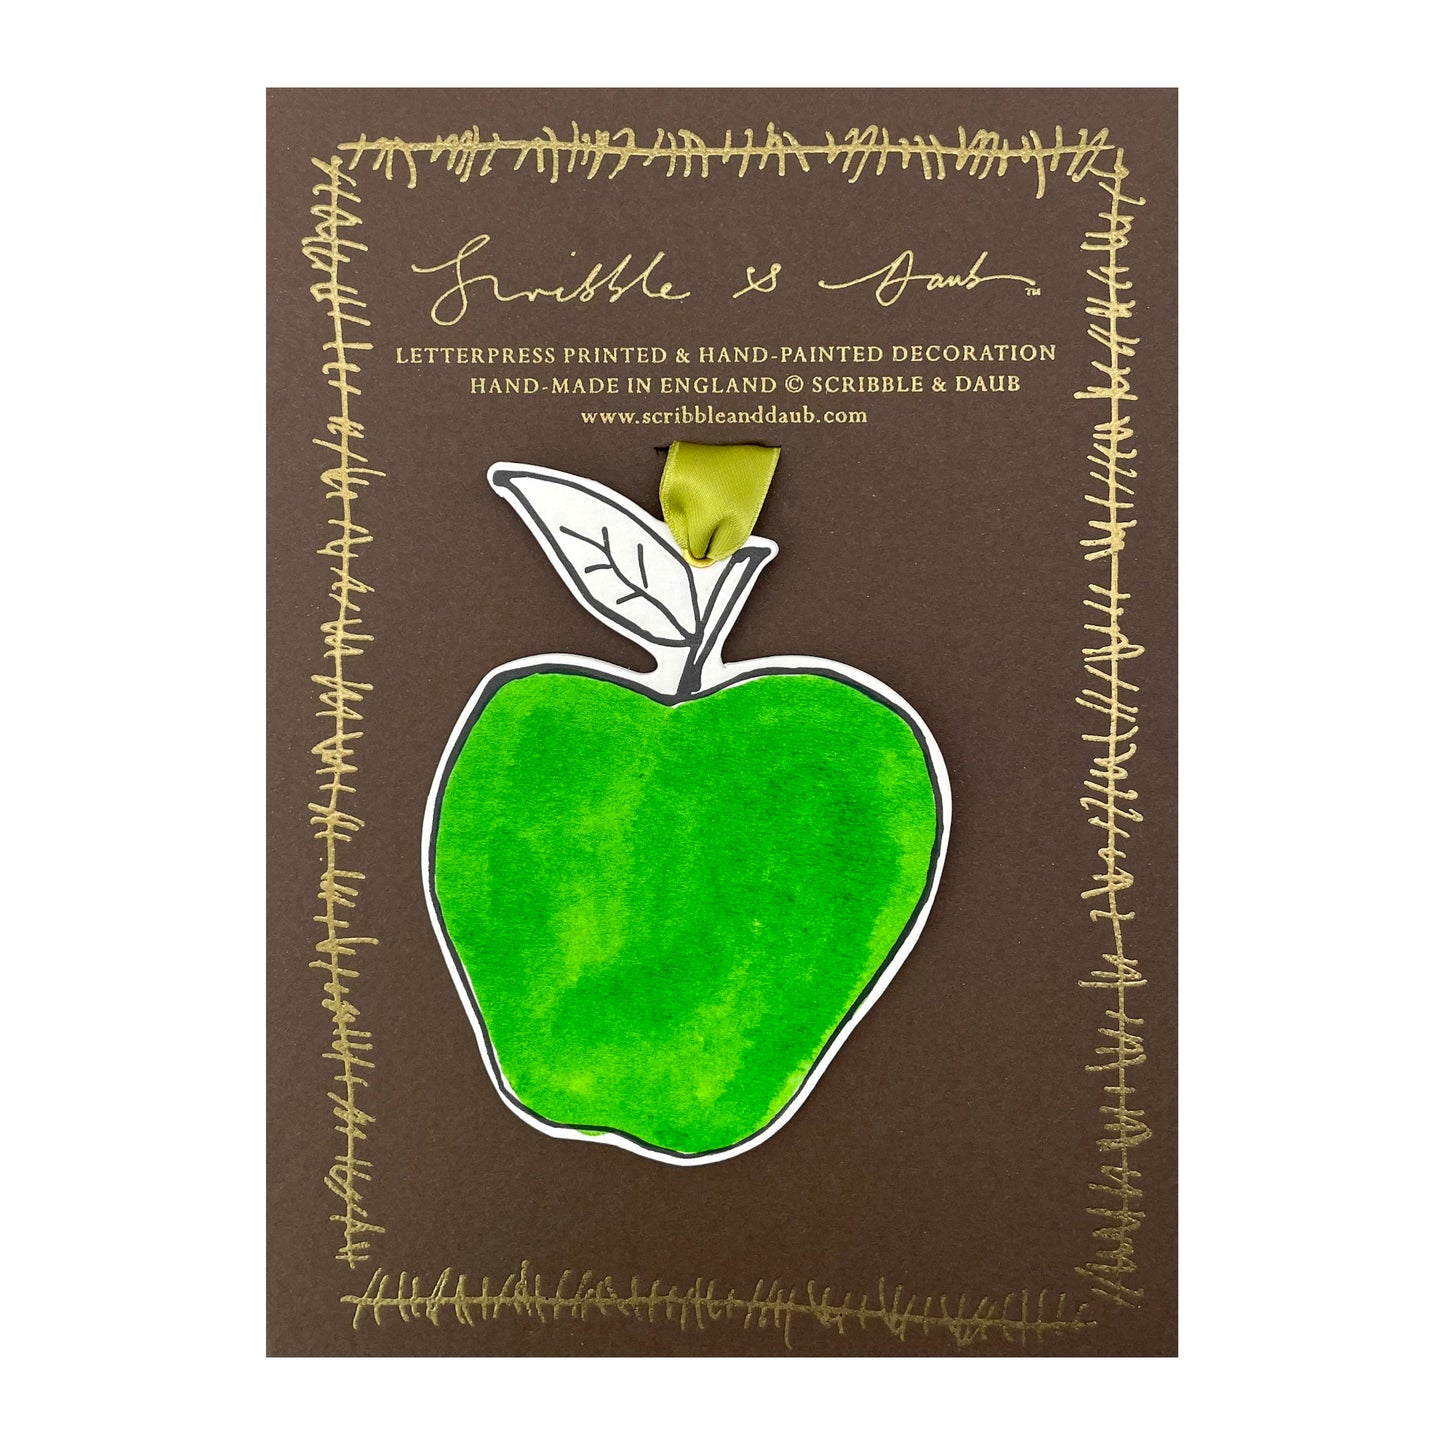 an apple shaped hanging ornament made of thick 1050gsm off-white card, letterpress printed in black and then hand painted in bright green ink. It has a chartreuse green satin ribbon to hang the ornament with. By Scribble & Daub. Pictured on a gold-foiled brown board.